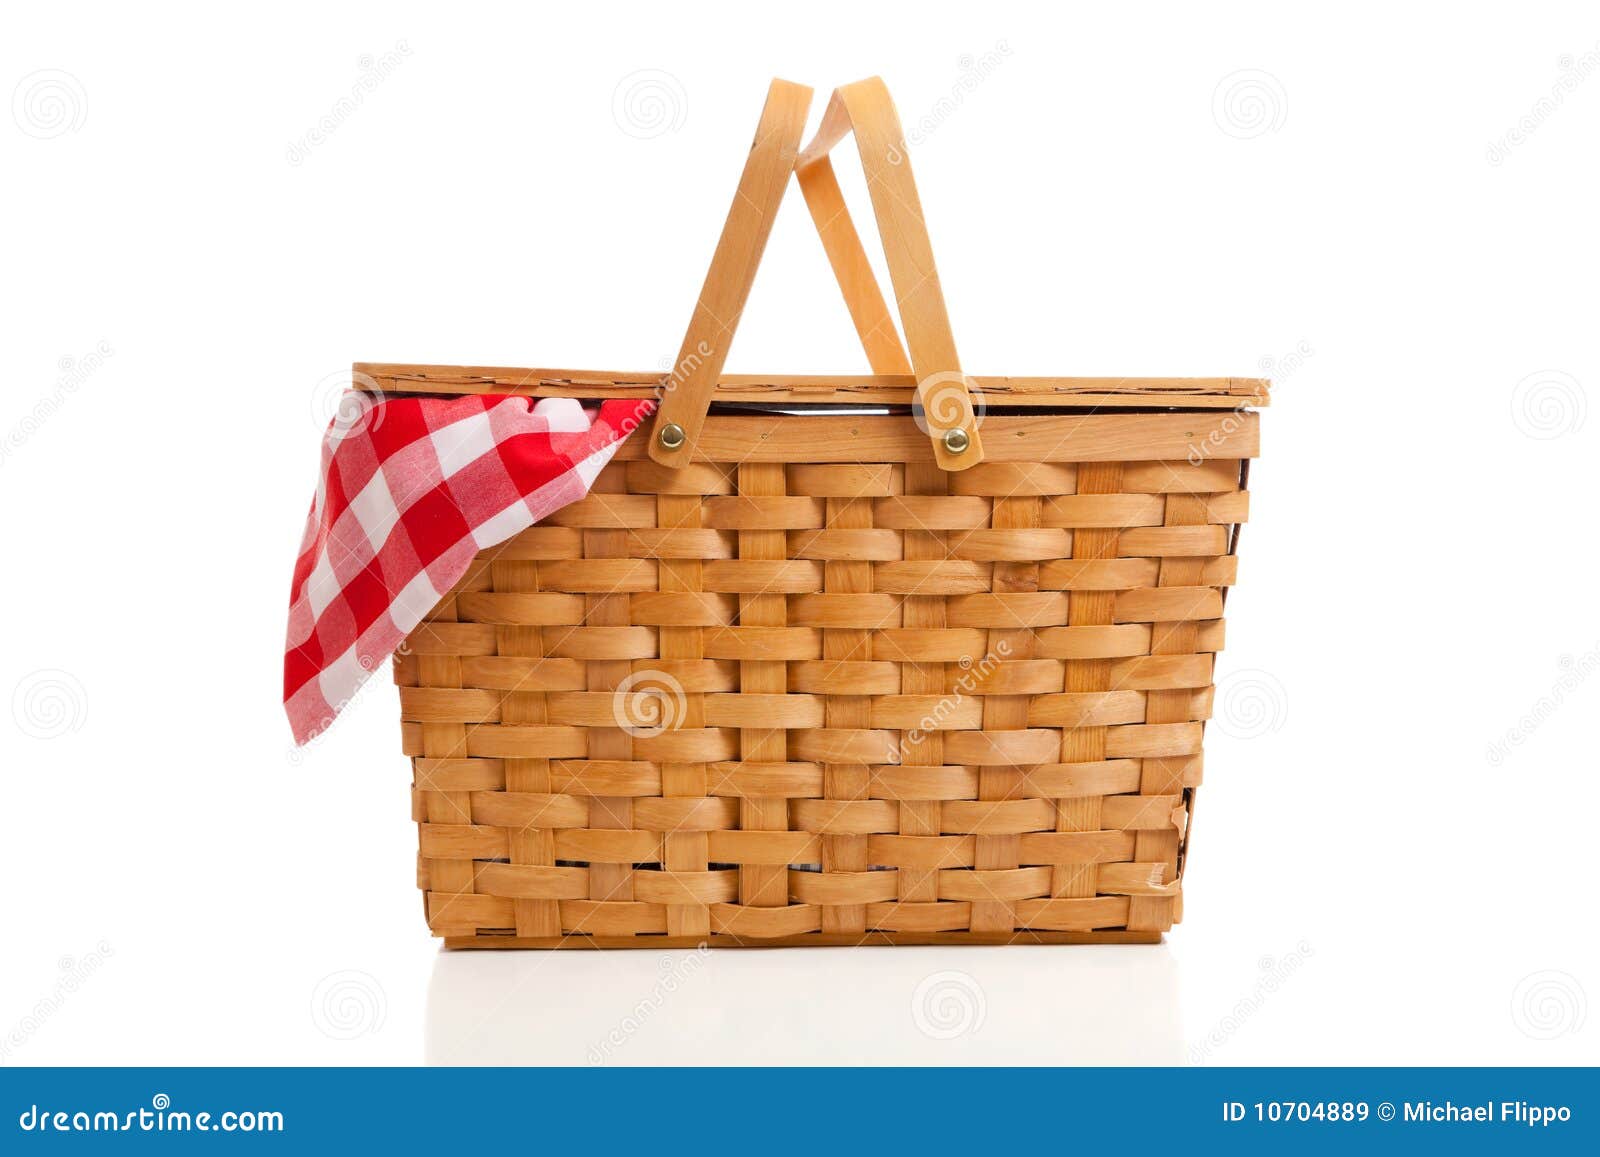 wicker picnic basket with gingham cloth